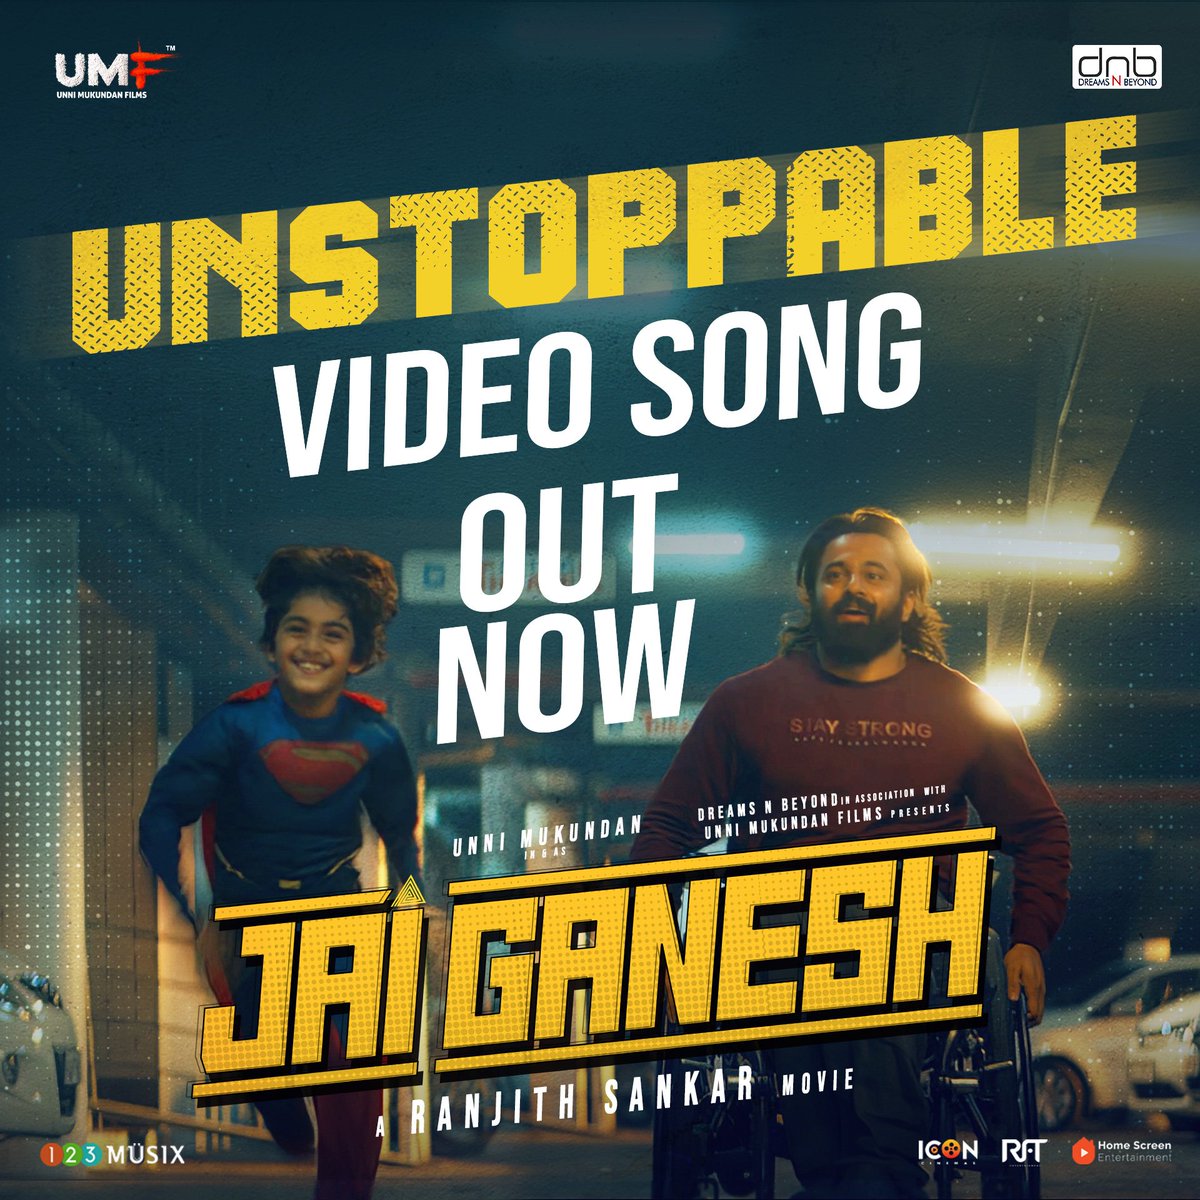 Dive Into The World Of Jai Ganesh With The New Video Song 'Unstoppable' Watch It Now! 🎶🔥

Watch Now: youtu.be/siIkFIK6fvs

#malayalam #jaiganesh #unstoppable #videosong #malayalamsong #unnimukundan #MahimaNambiar #OutNow #WatchNow